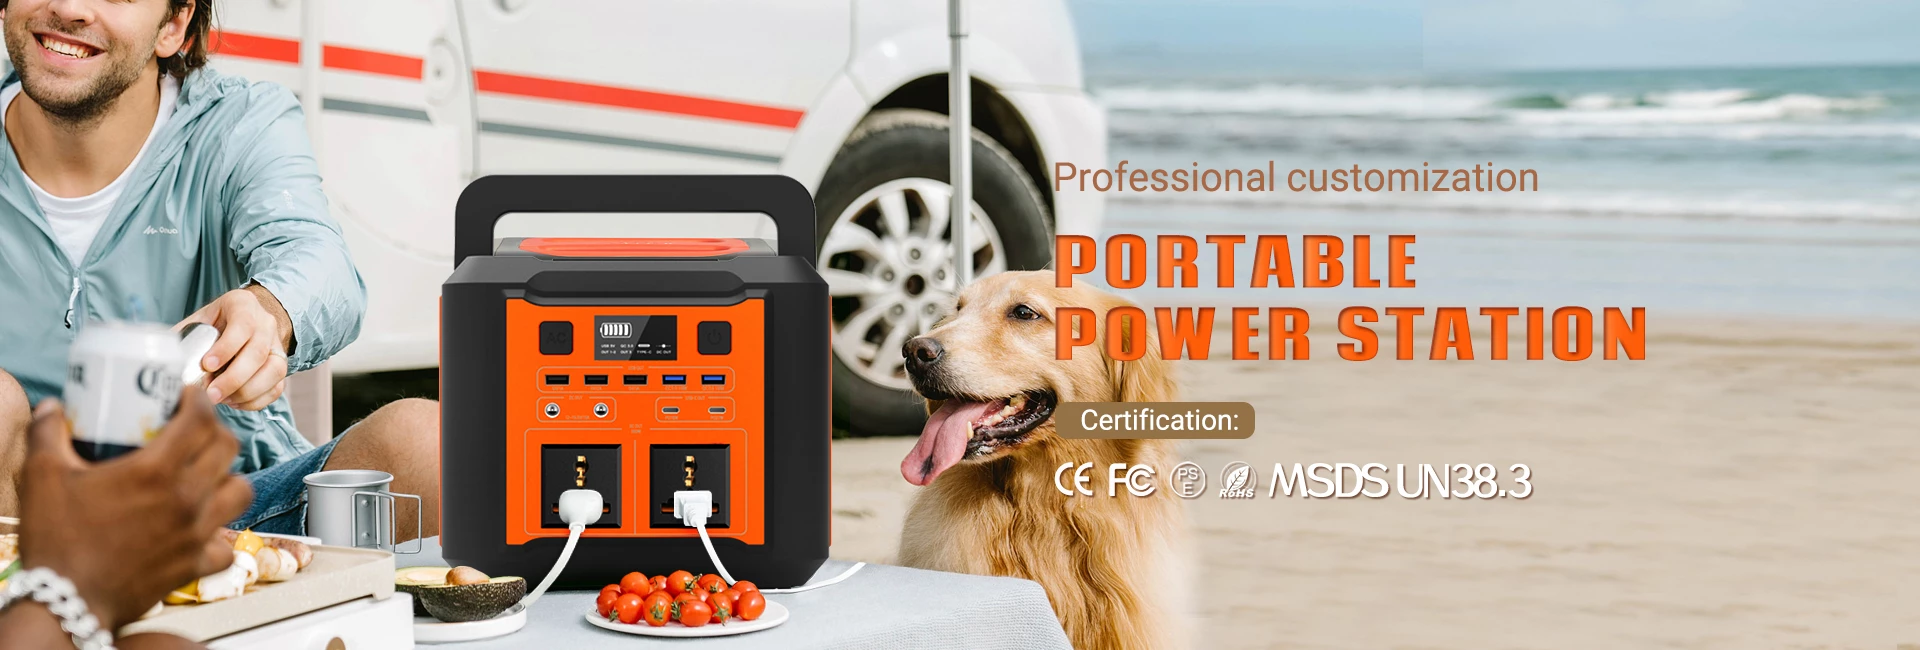 Pure Sine power station 1500w lifepo4 solar generator for camping